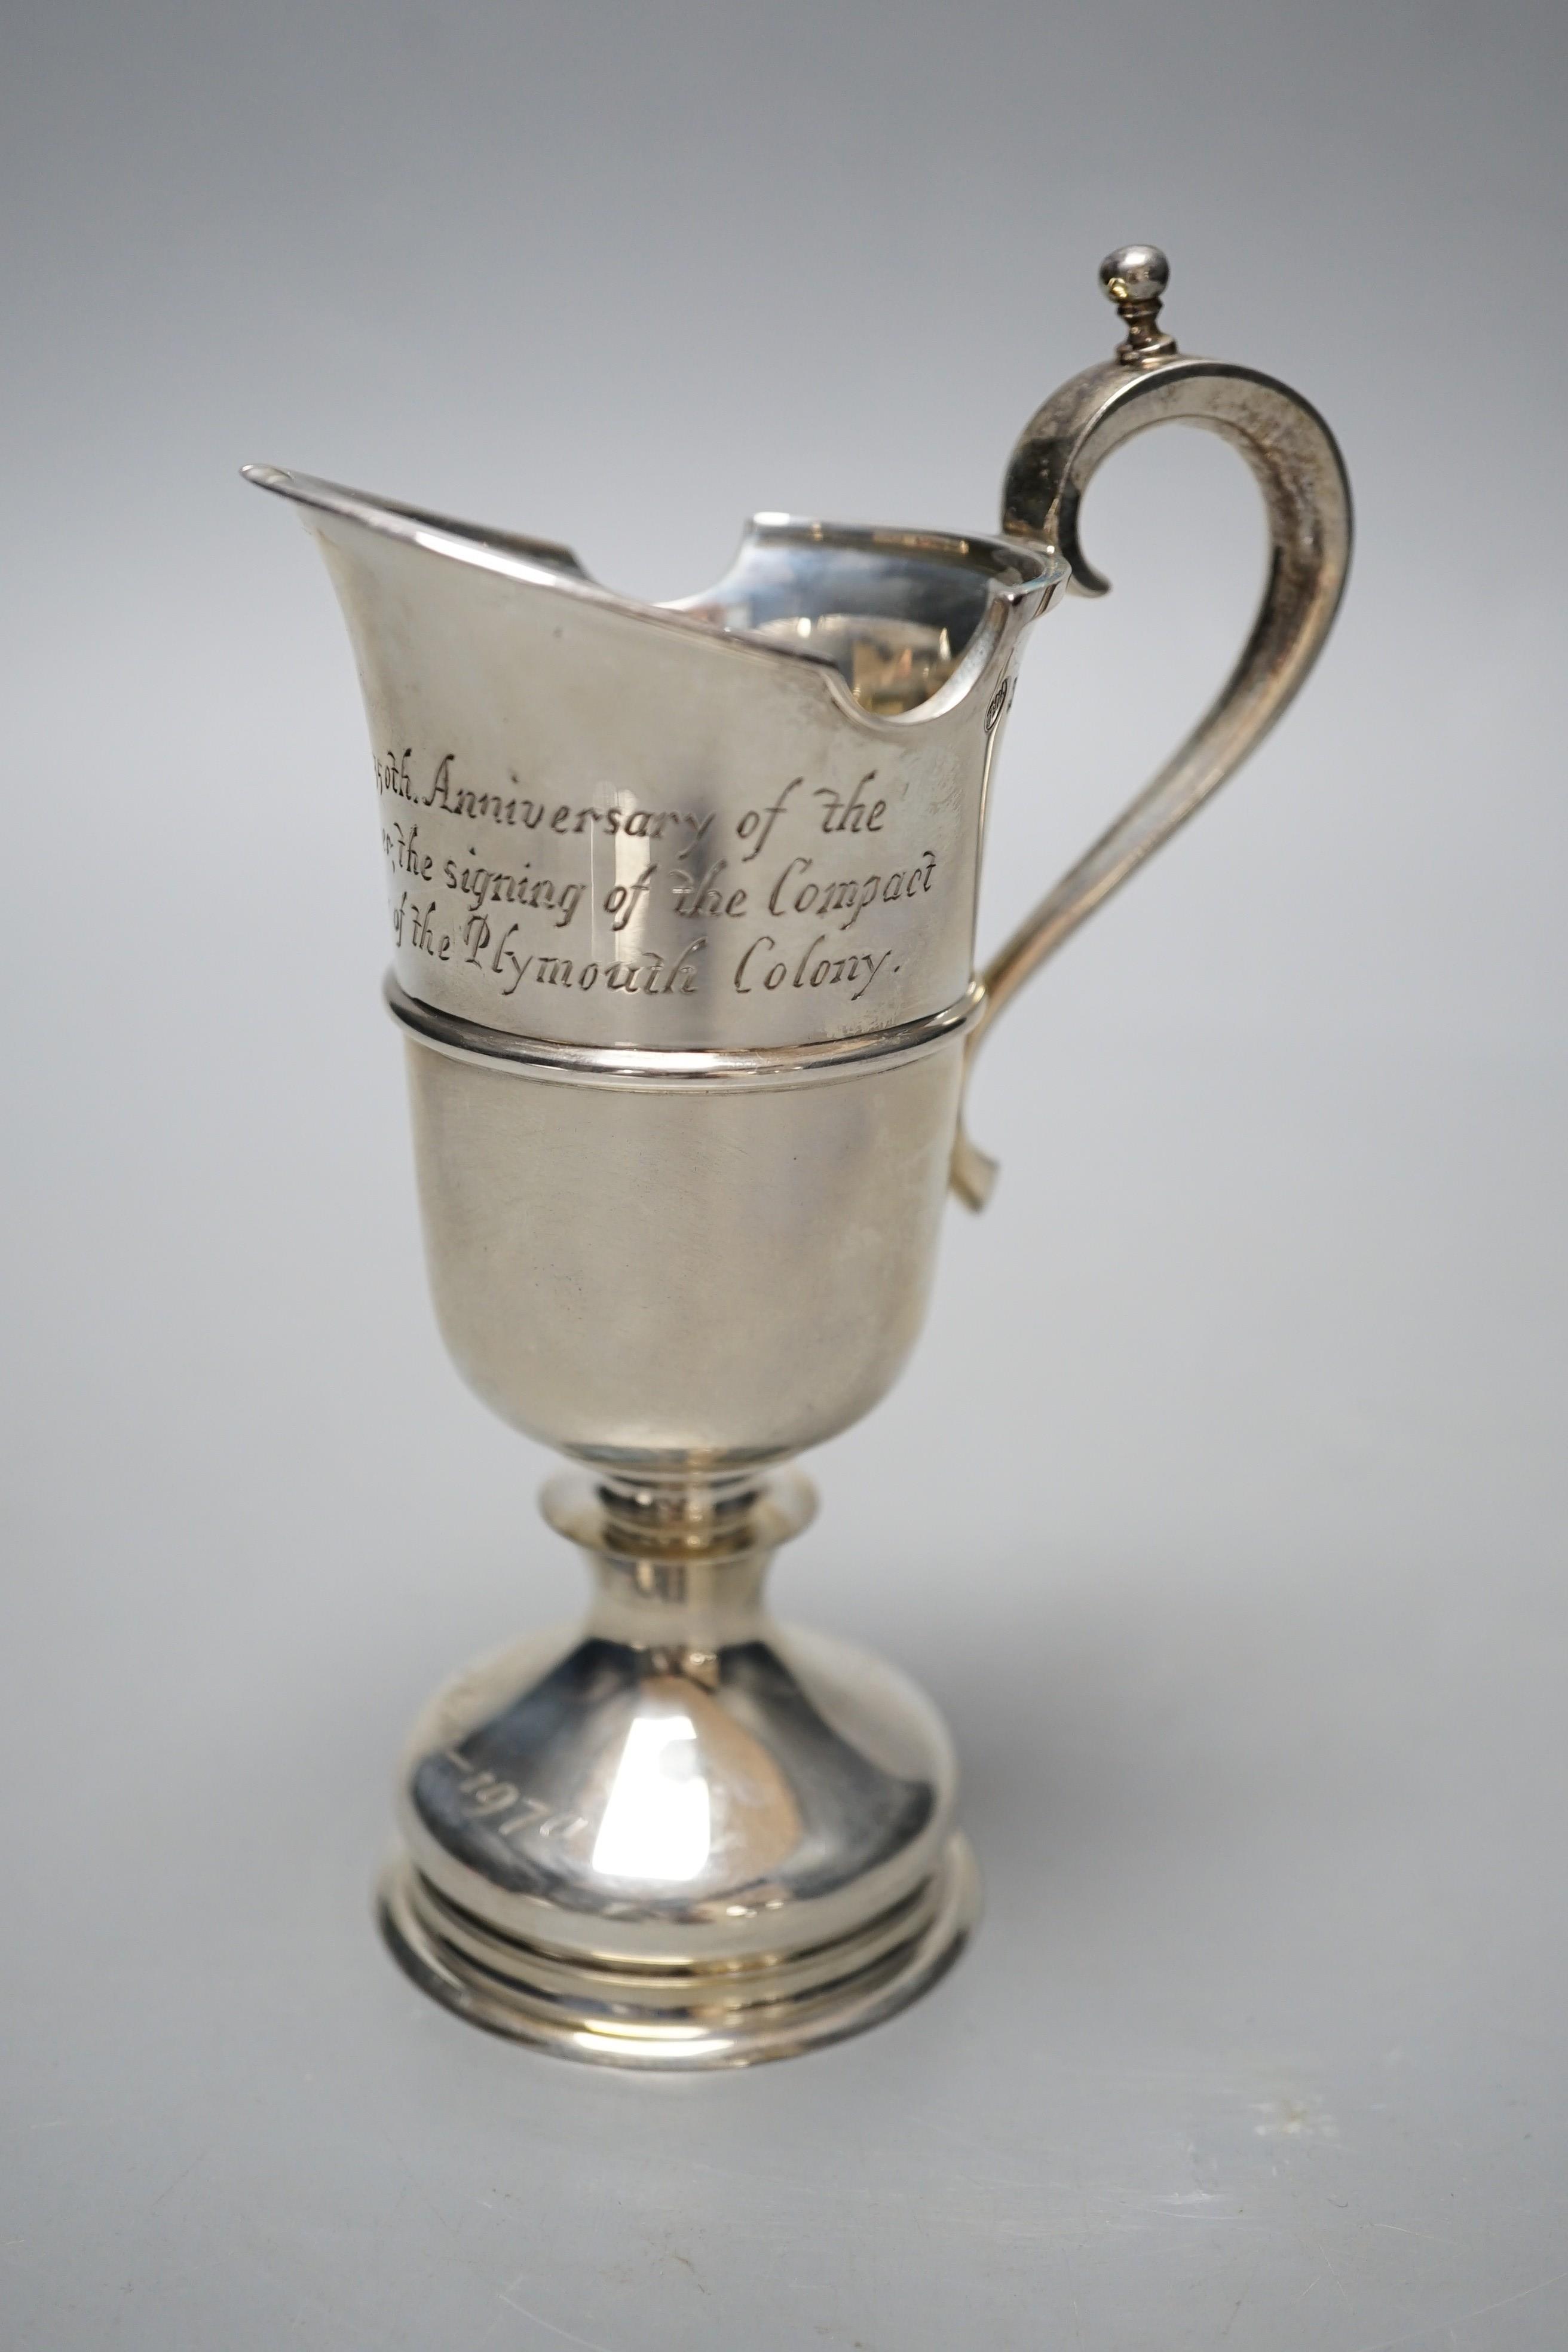 A modern limited edition silver cream jug, commemorating the 350th Anniversary of the sailing of the Mayflower, P Ltd, London, 1969, 14.5cm, 7.2oz.